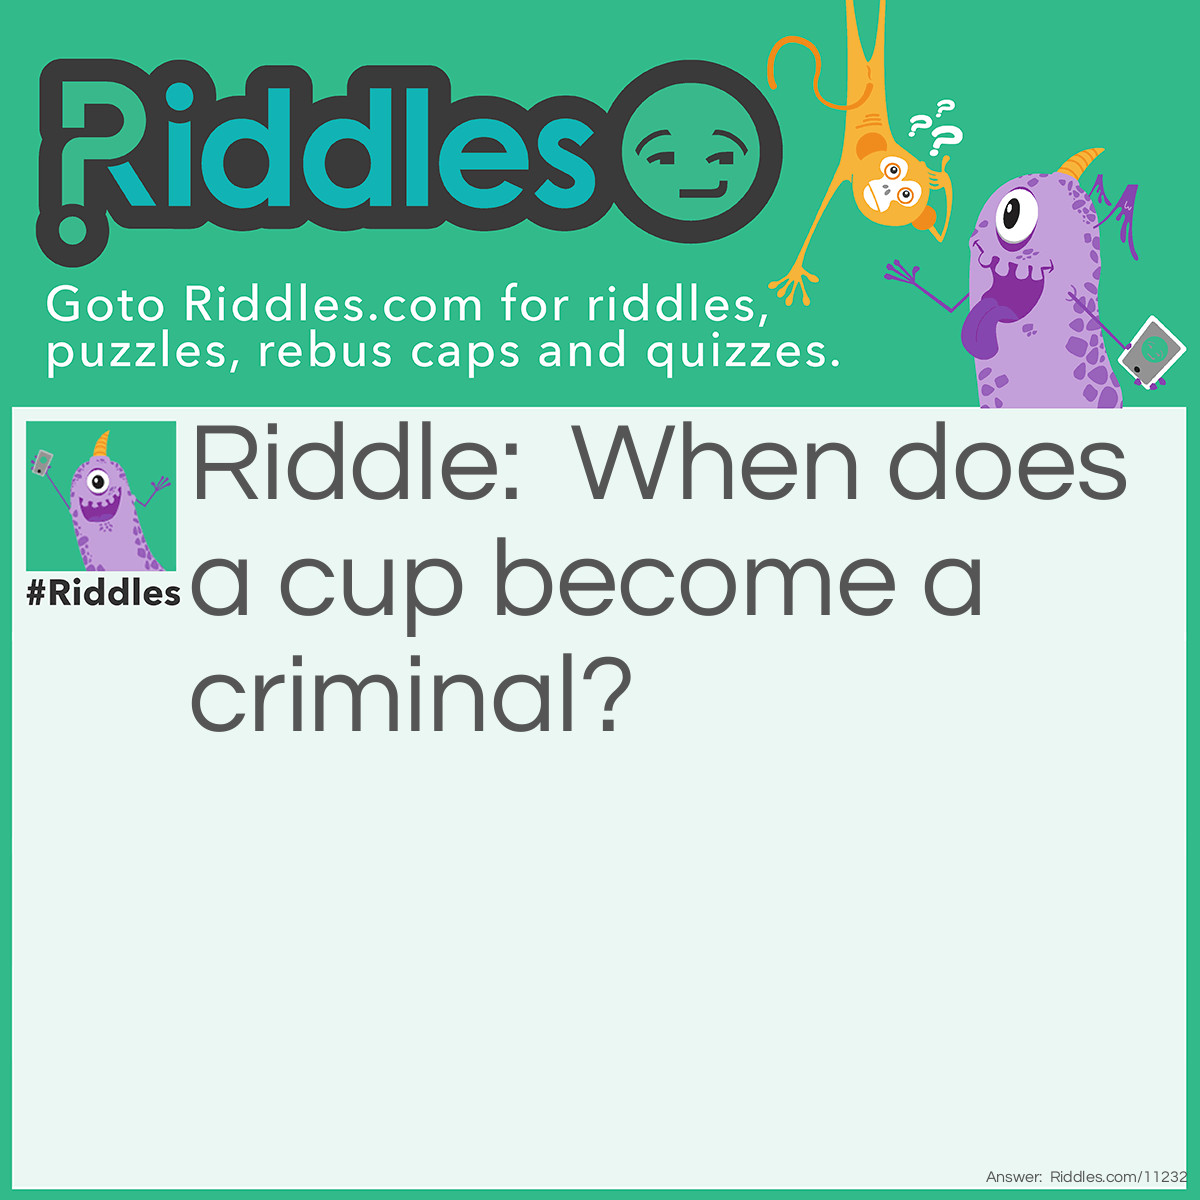 Riddle: When does a cup become a criminal? Answer: When it's a mugger (British word for someone who attacks and robs people).